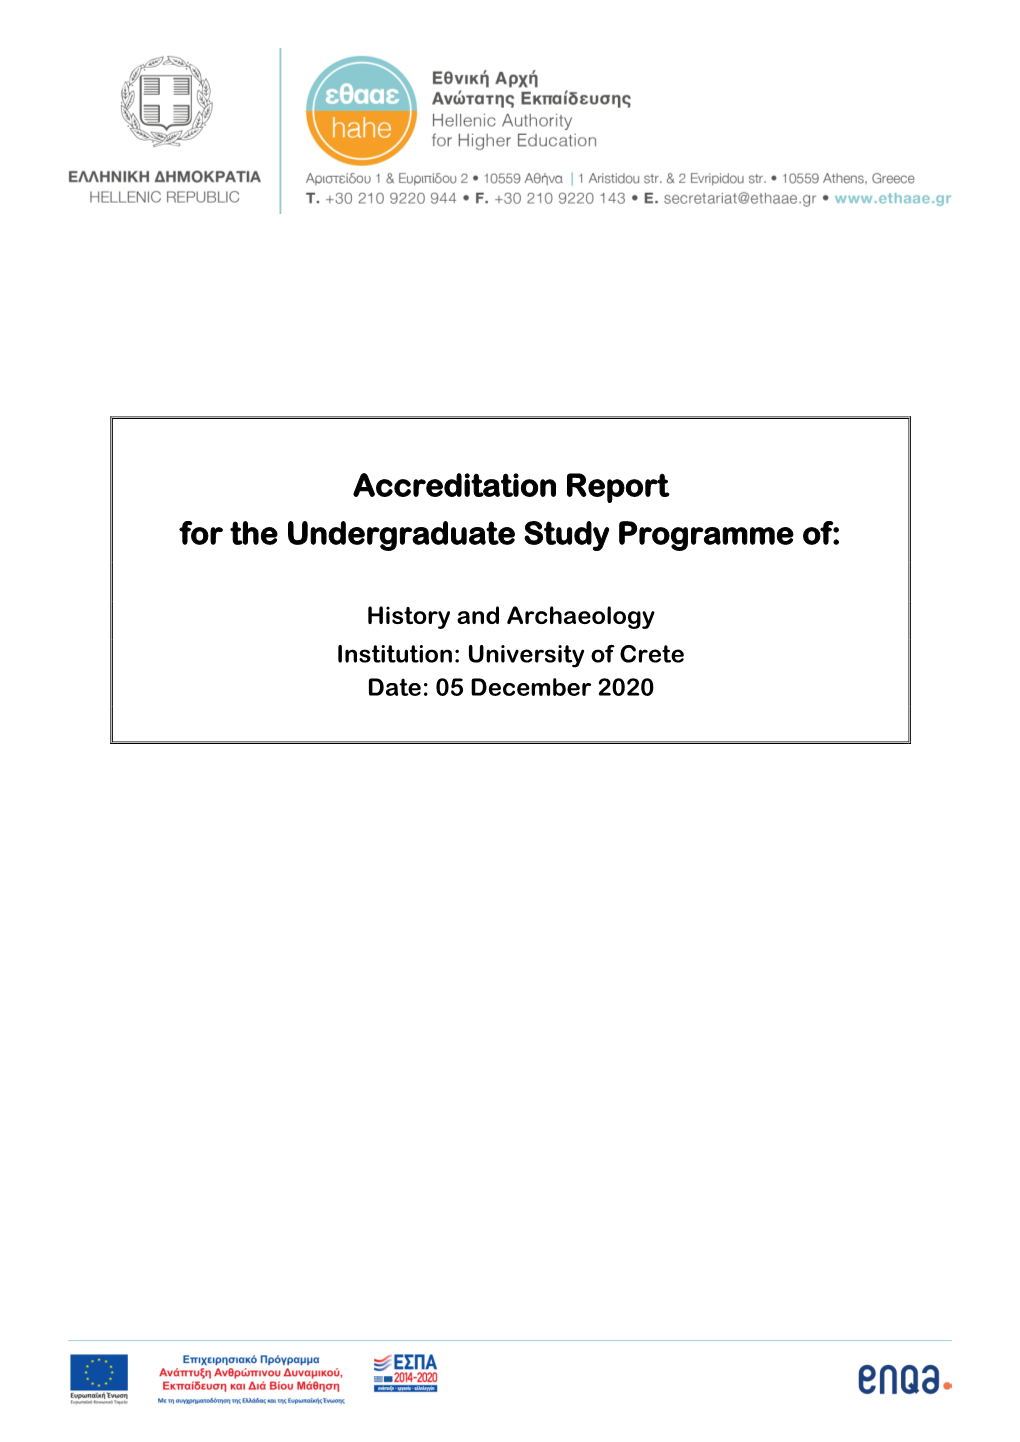 Accreditation Report for the Undergraduate Study Programme Of